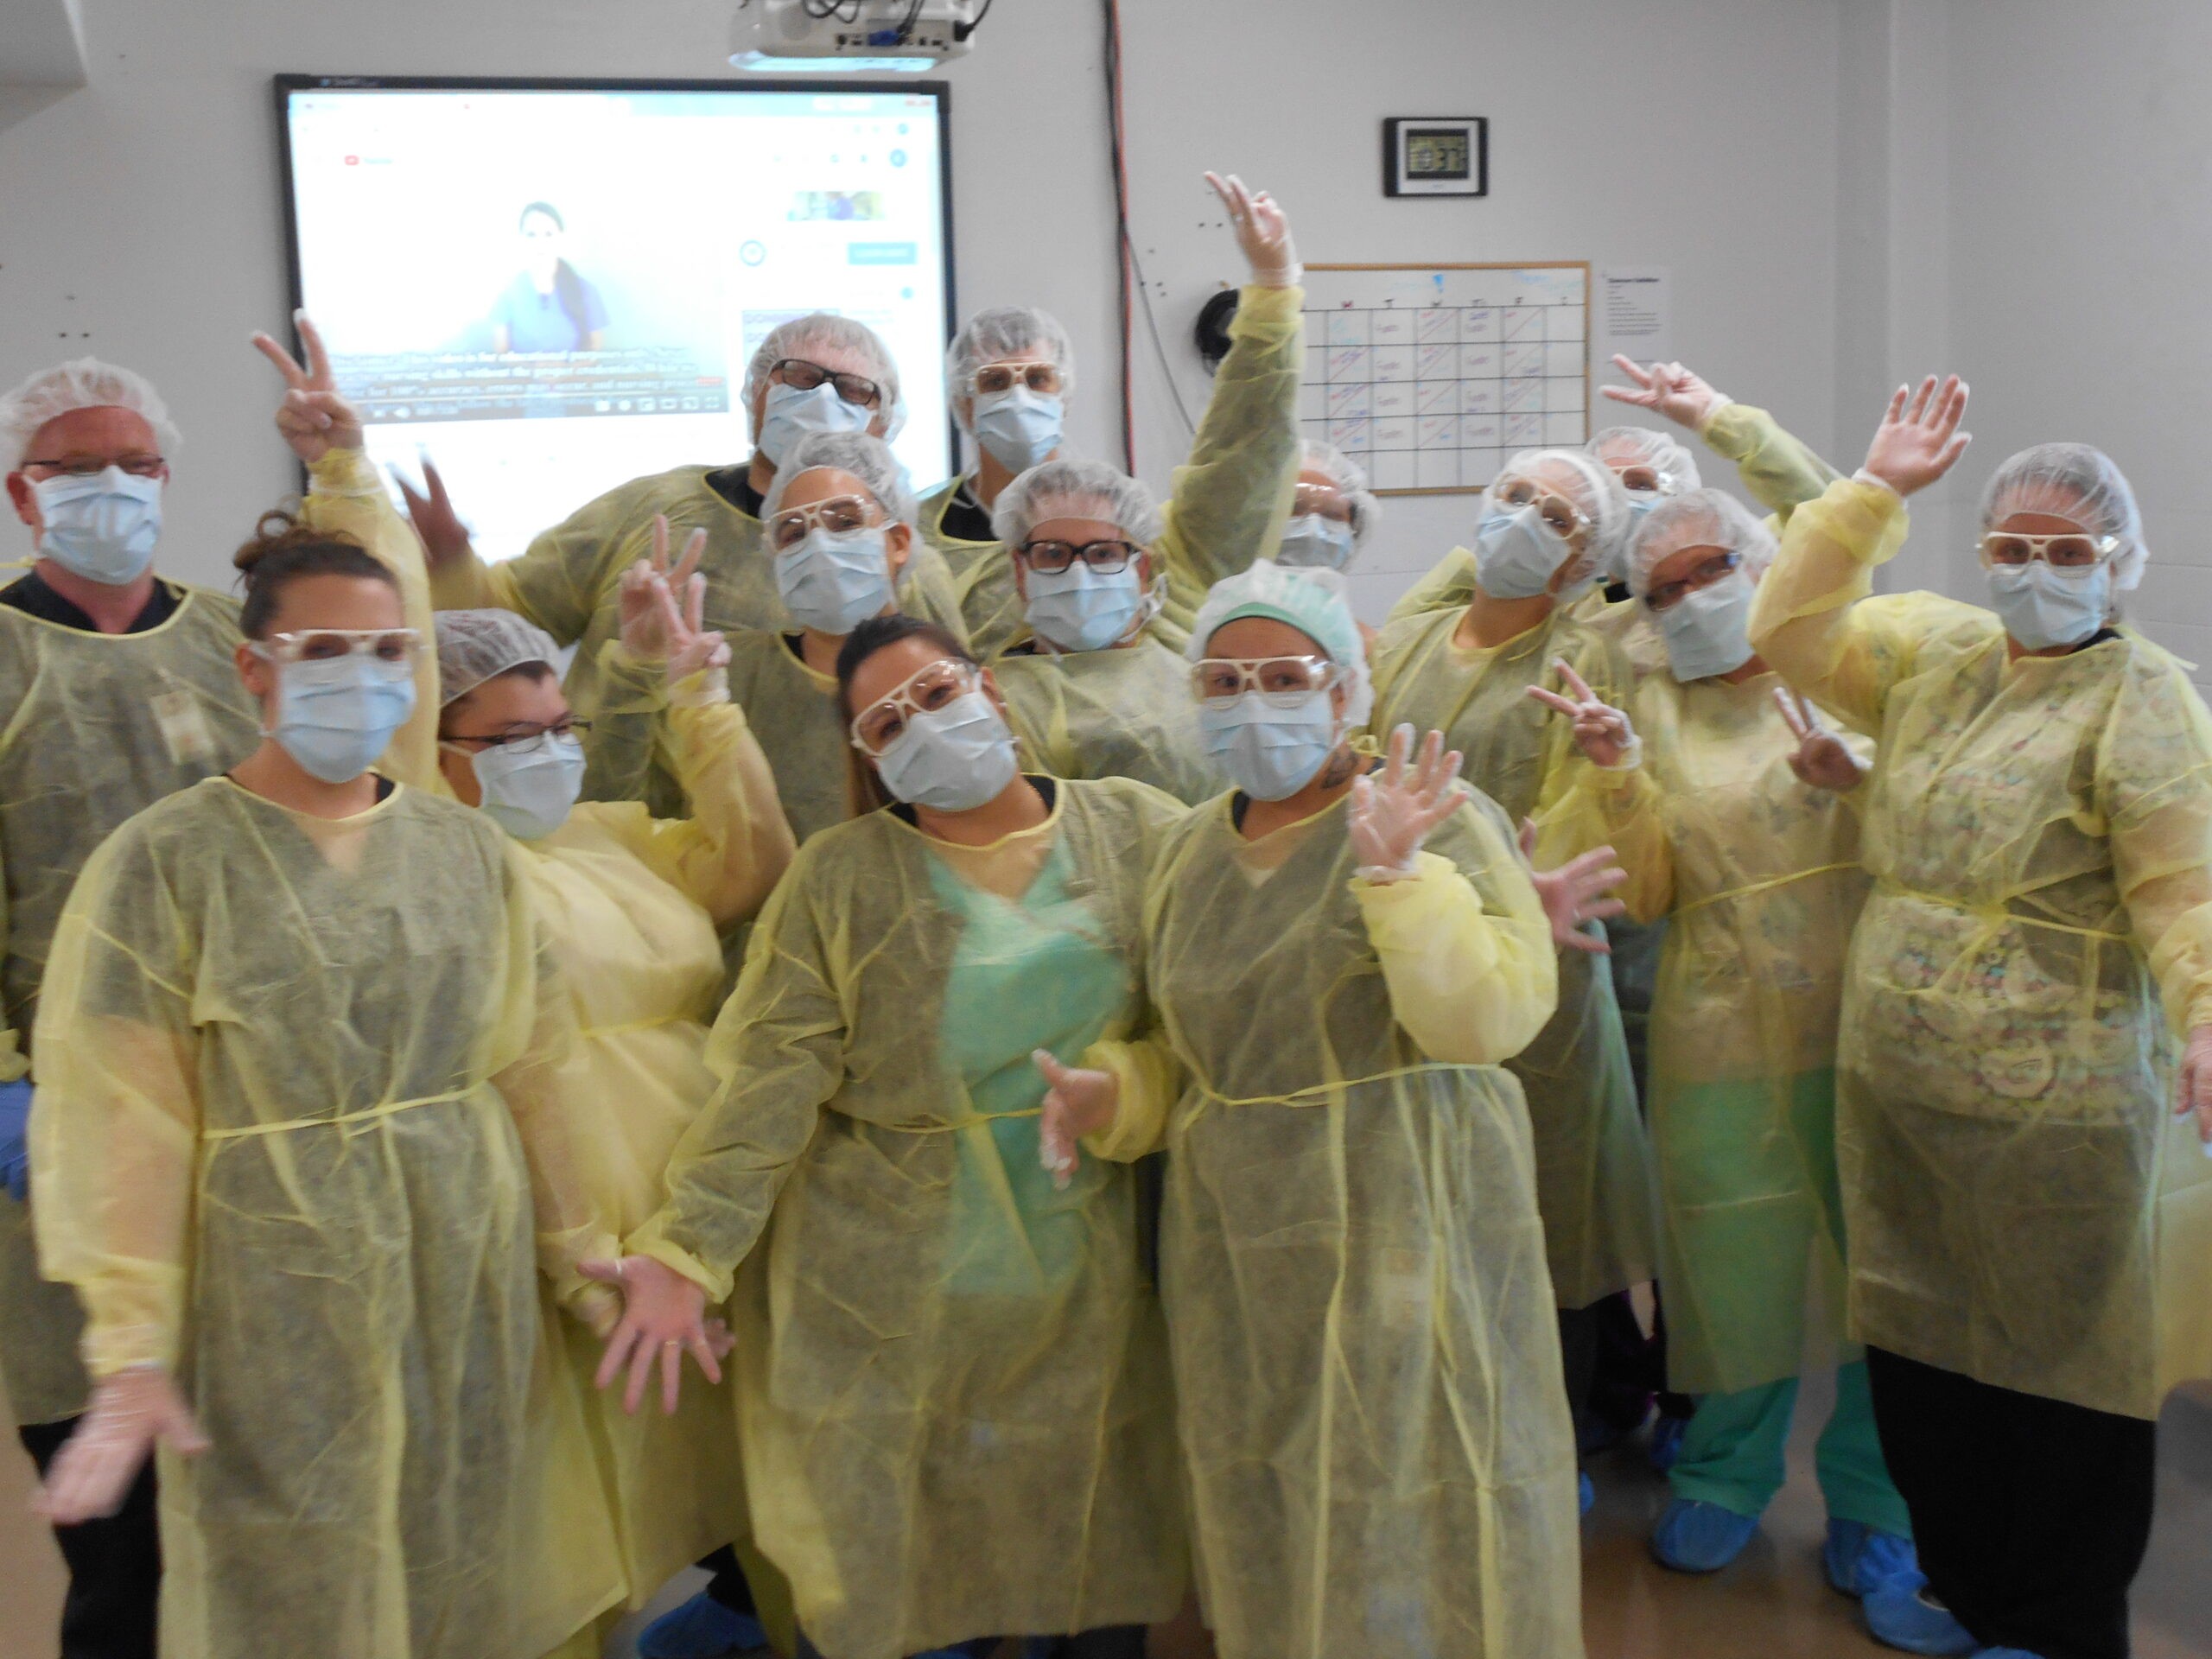 photo contains fourteen practical nursing students in yellow disposable gowns, masked and happy to be in their second semester.